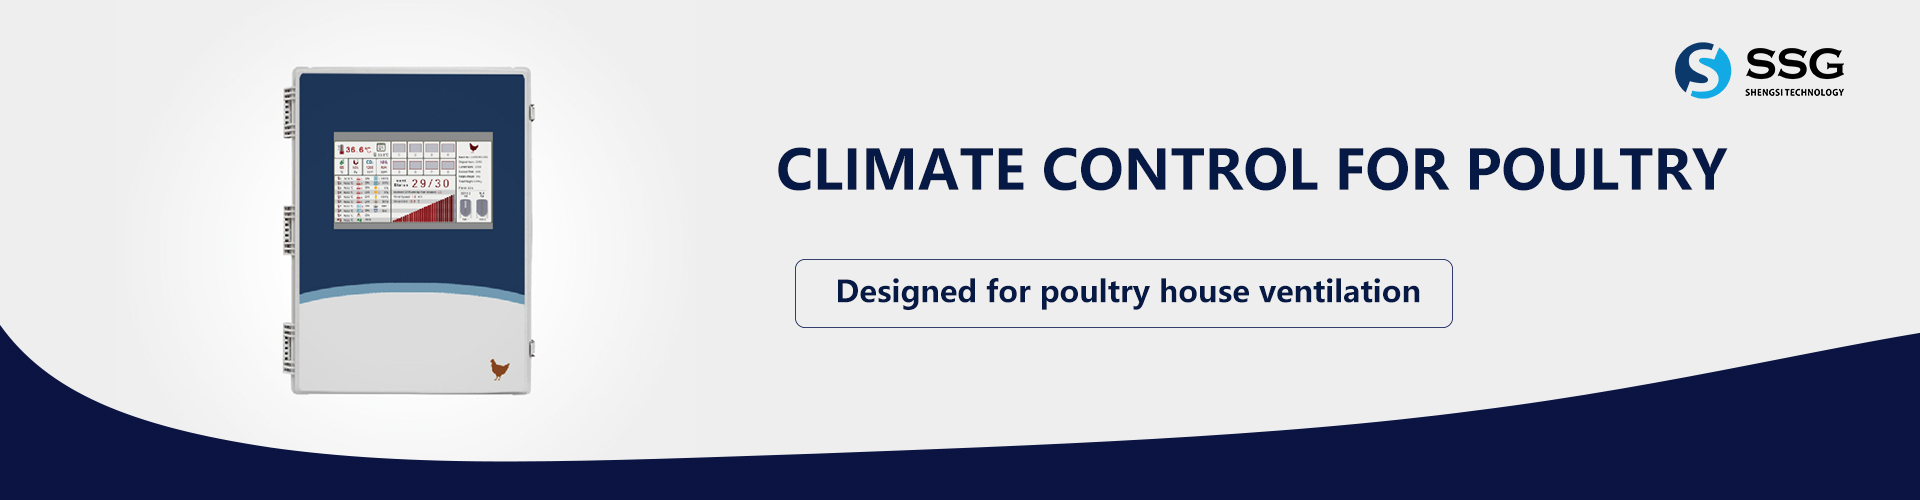 CLIMATE-CONTROL-FOR-POULTRY-banner